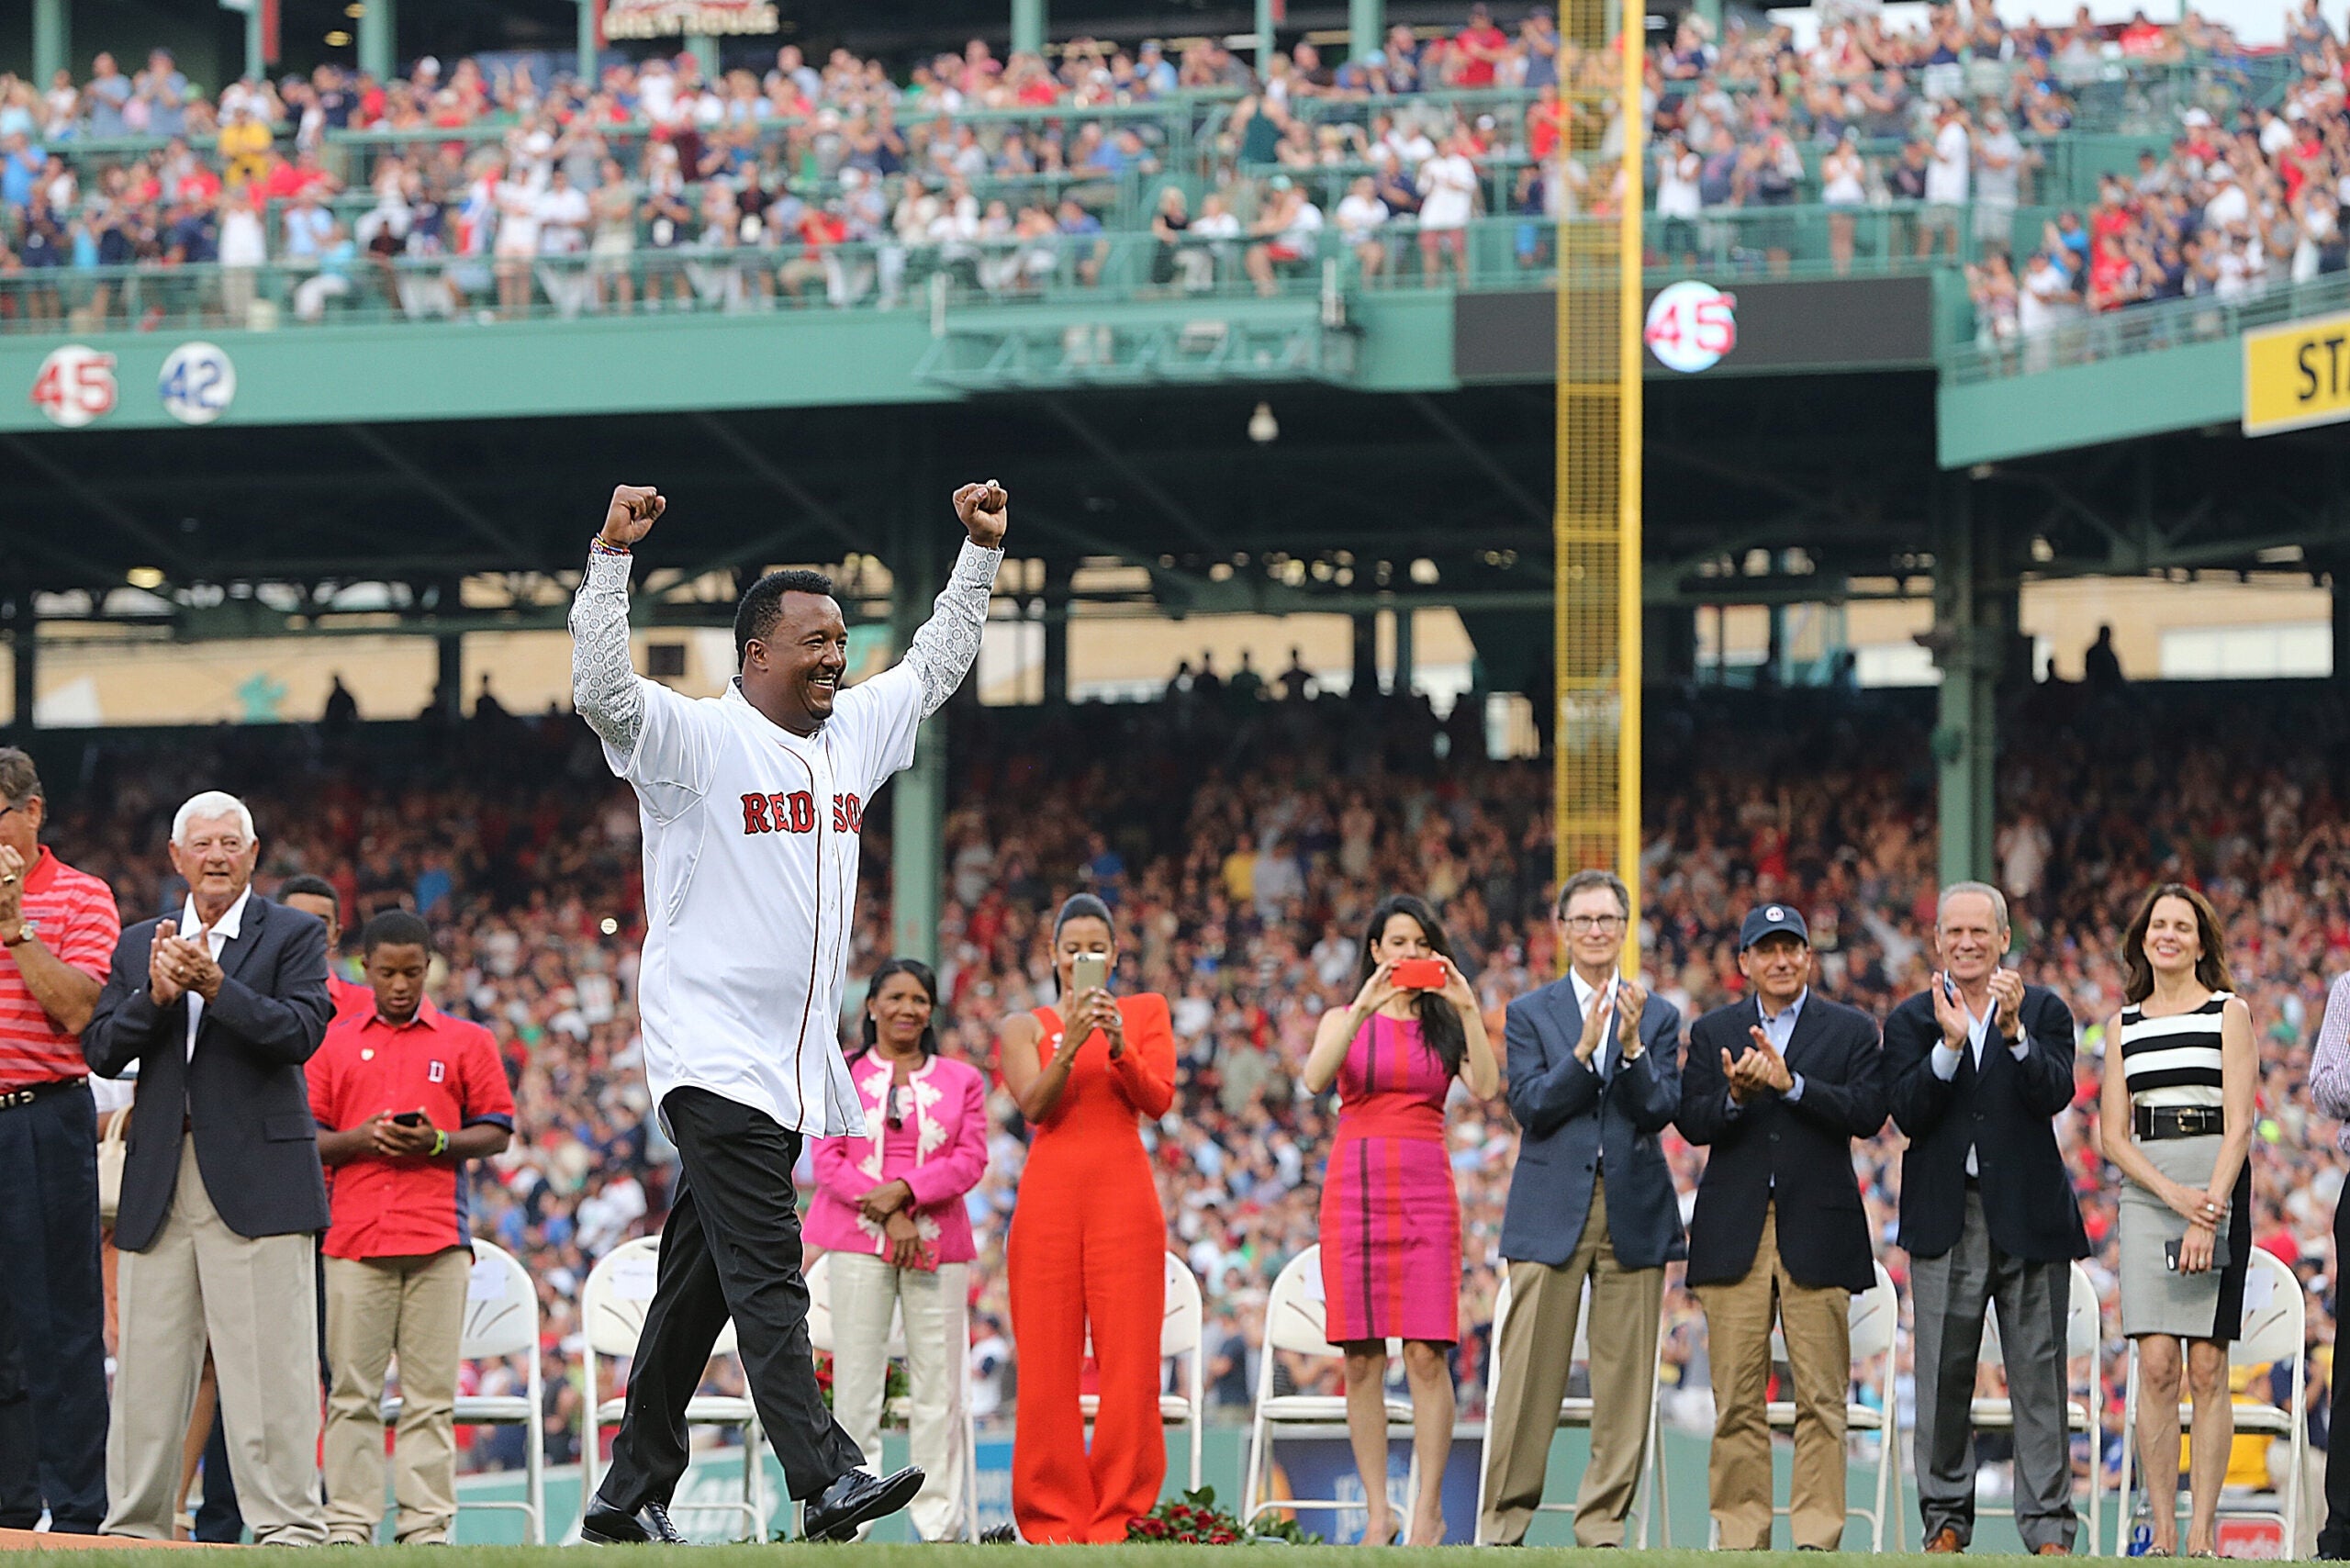 Sox to retire Pedro Martinez number '45' on July 28